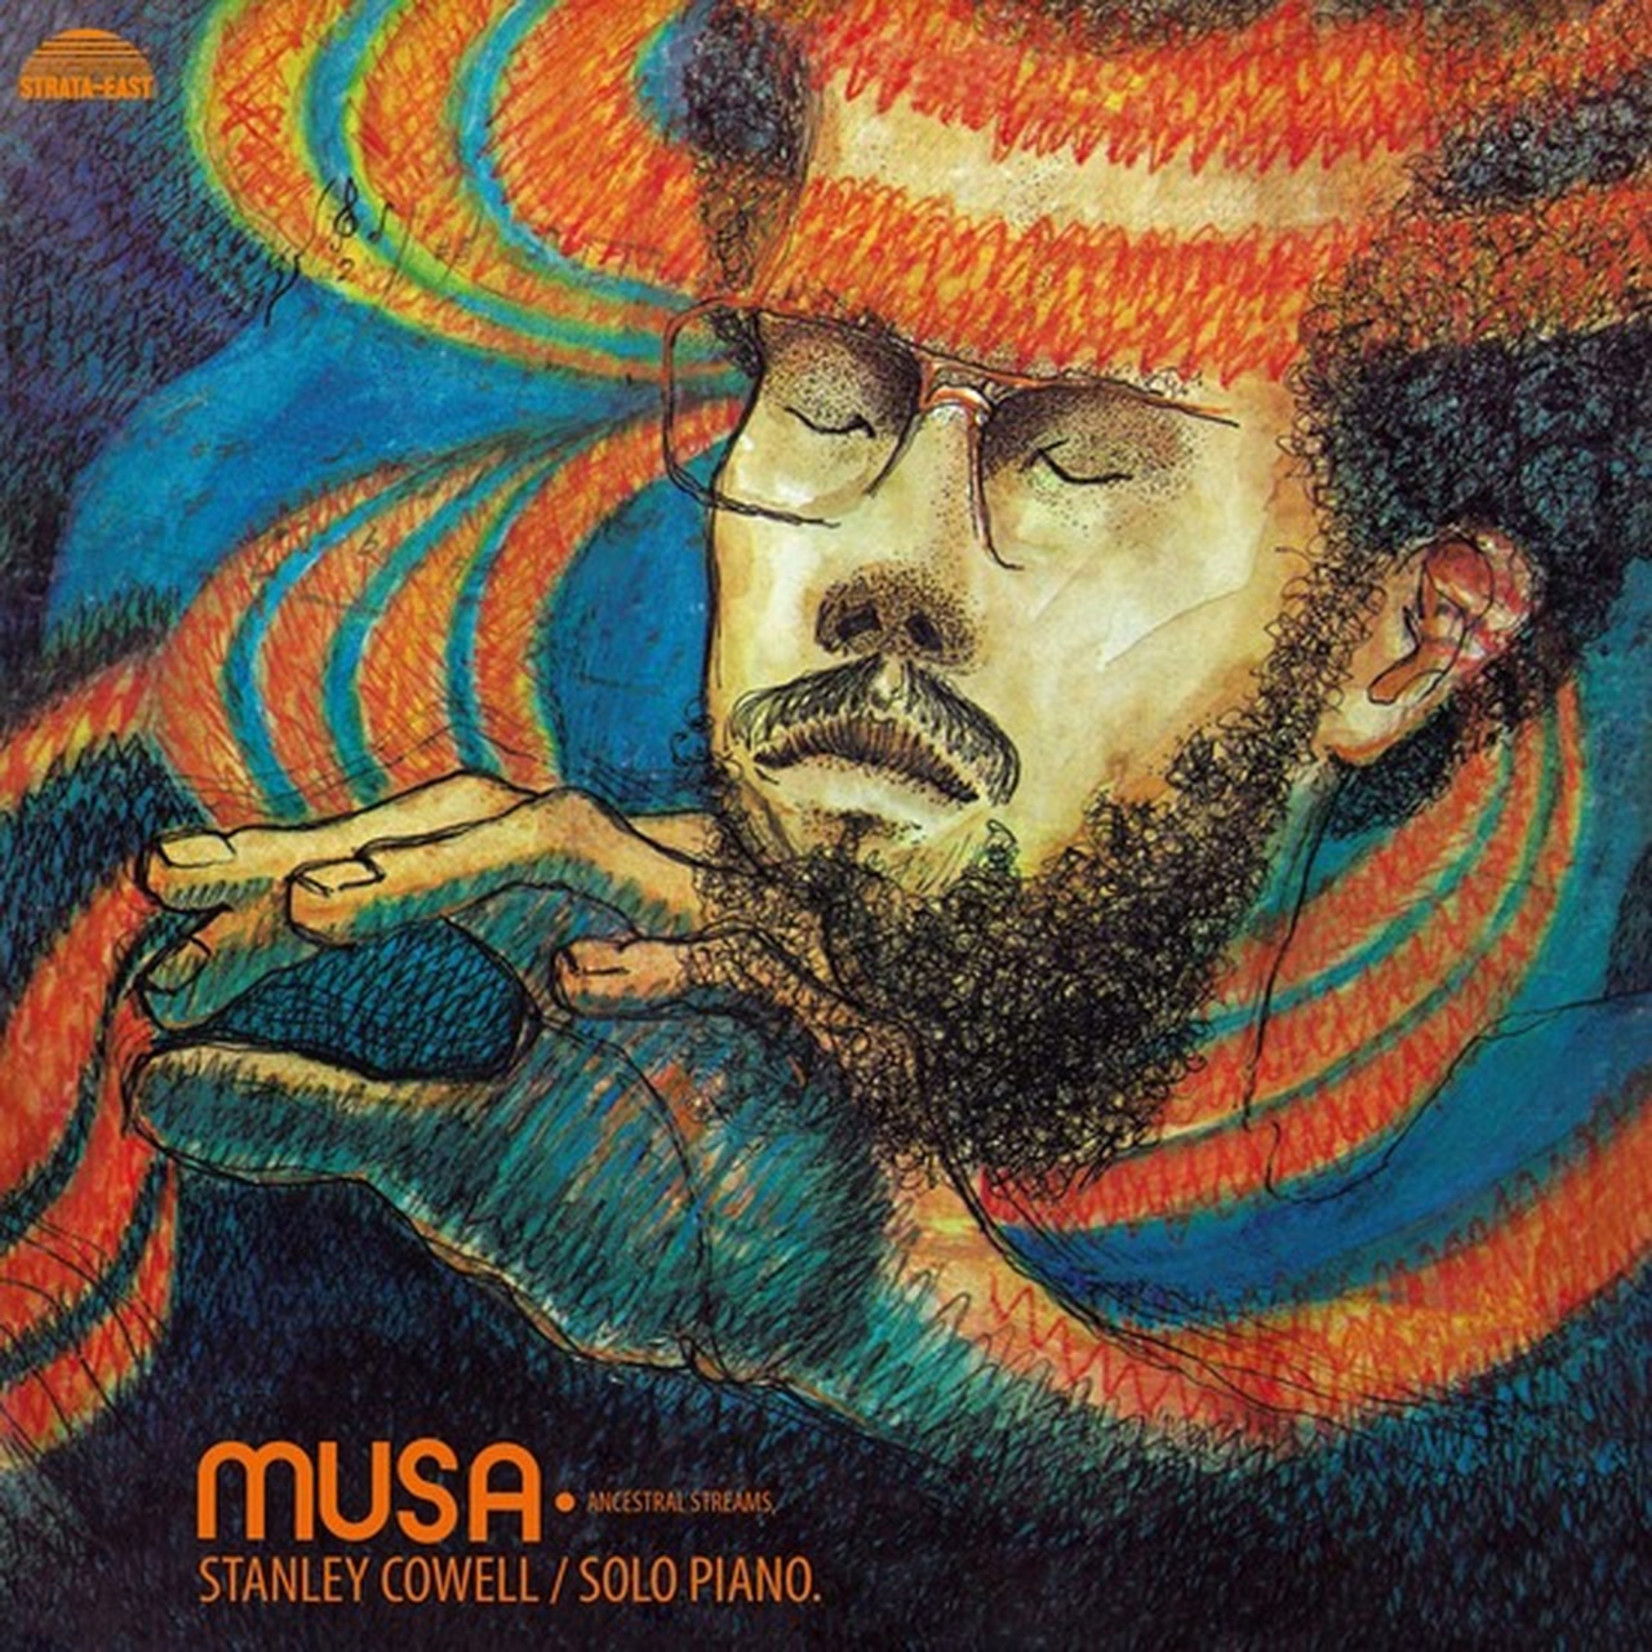 [New] Stanley Cowell - Musa-Ancestral Streams